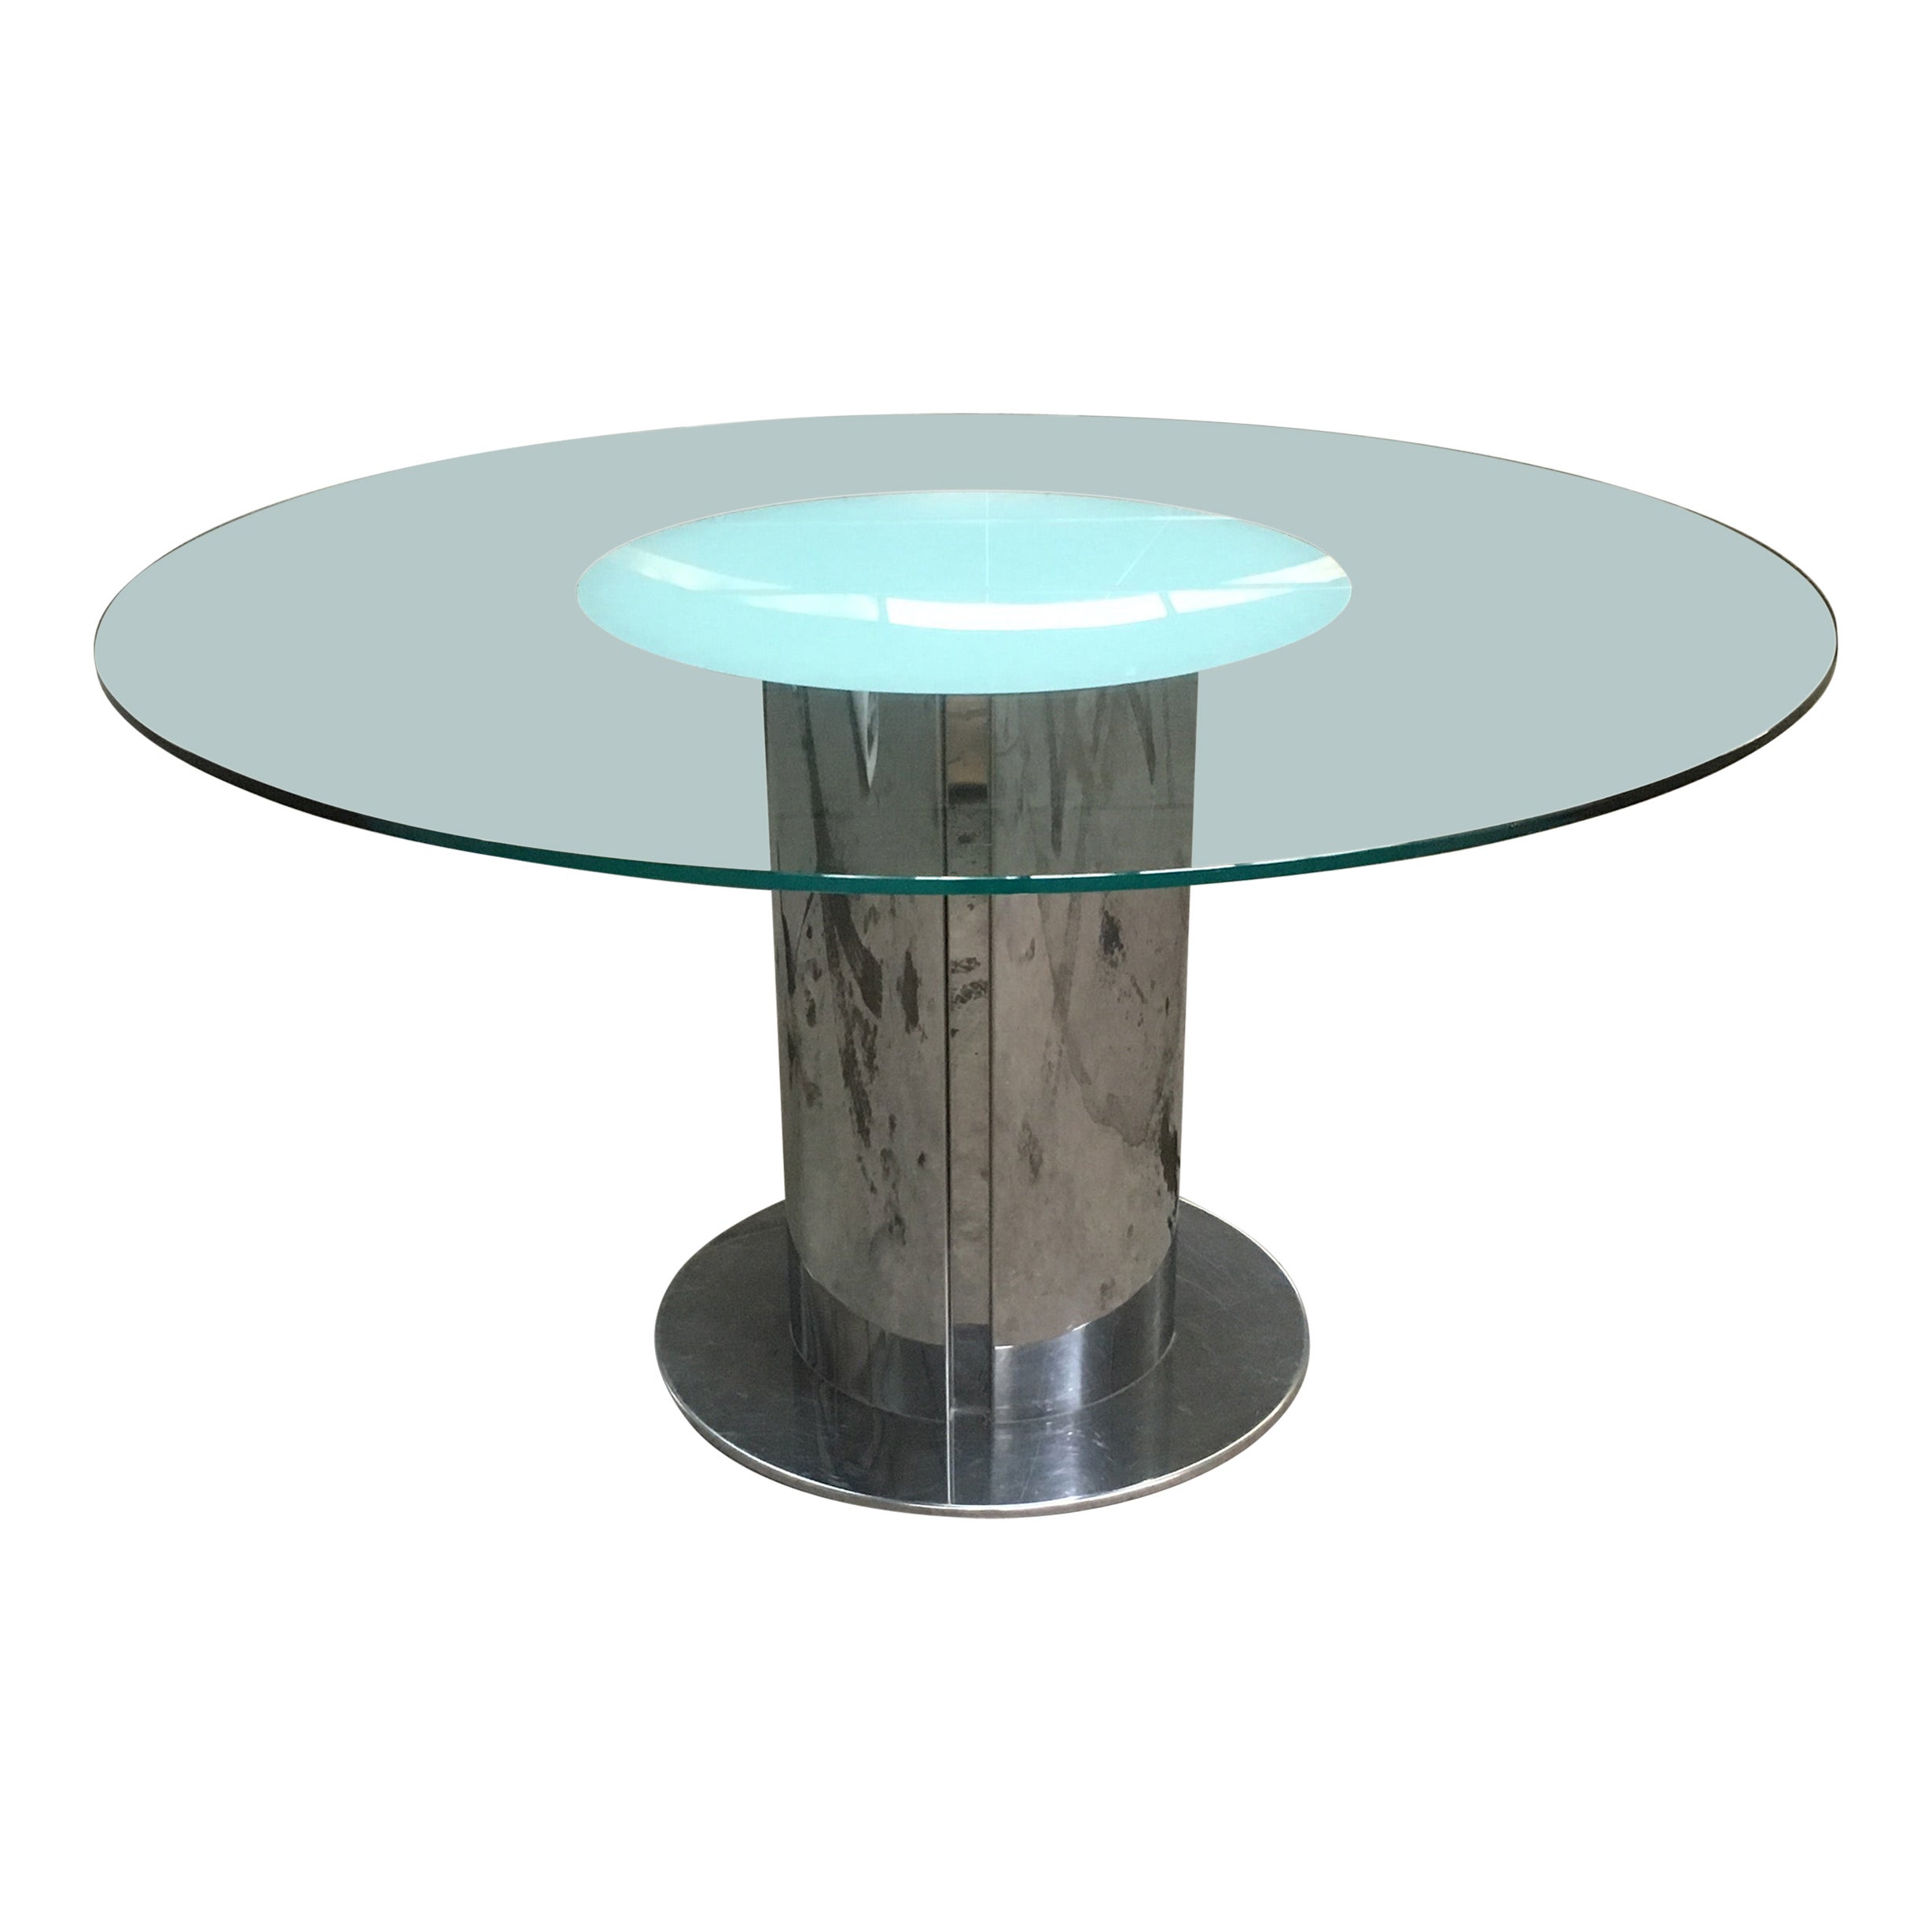 Mid-Century Modern Italian "Cidonio" Stainless Steel and Glass Table by Cidue For Sale